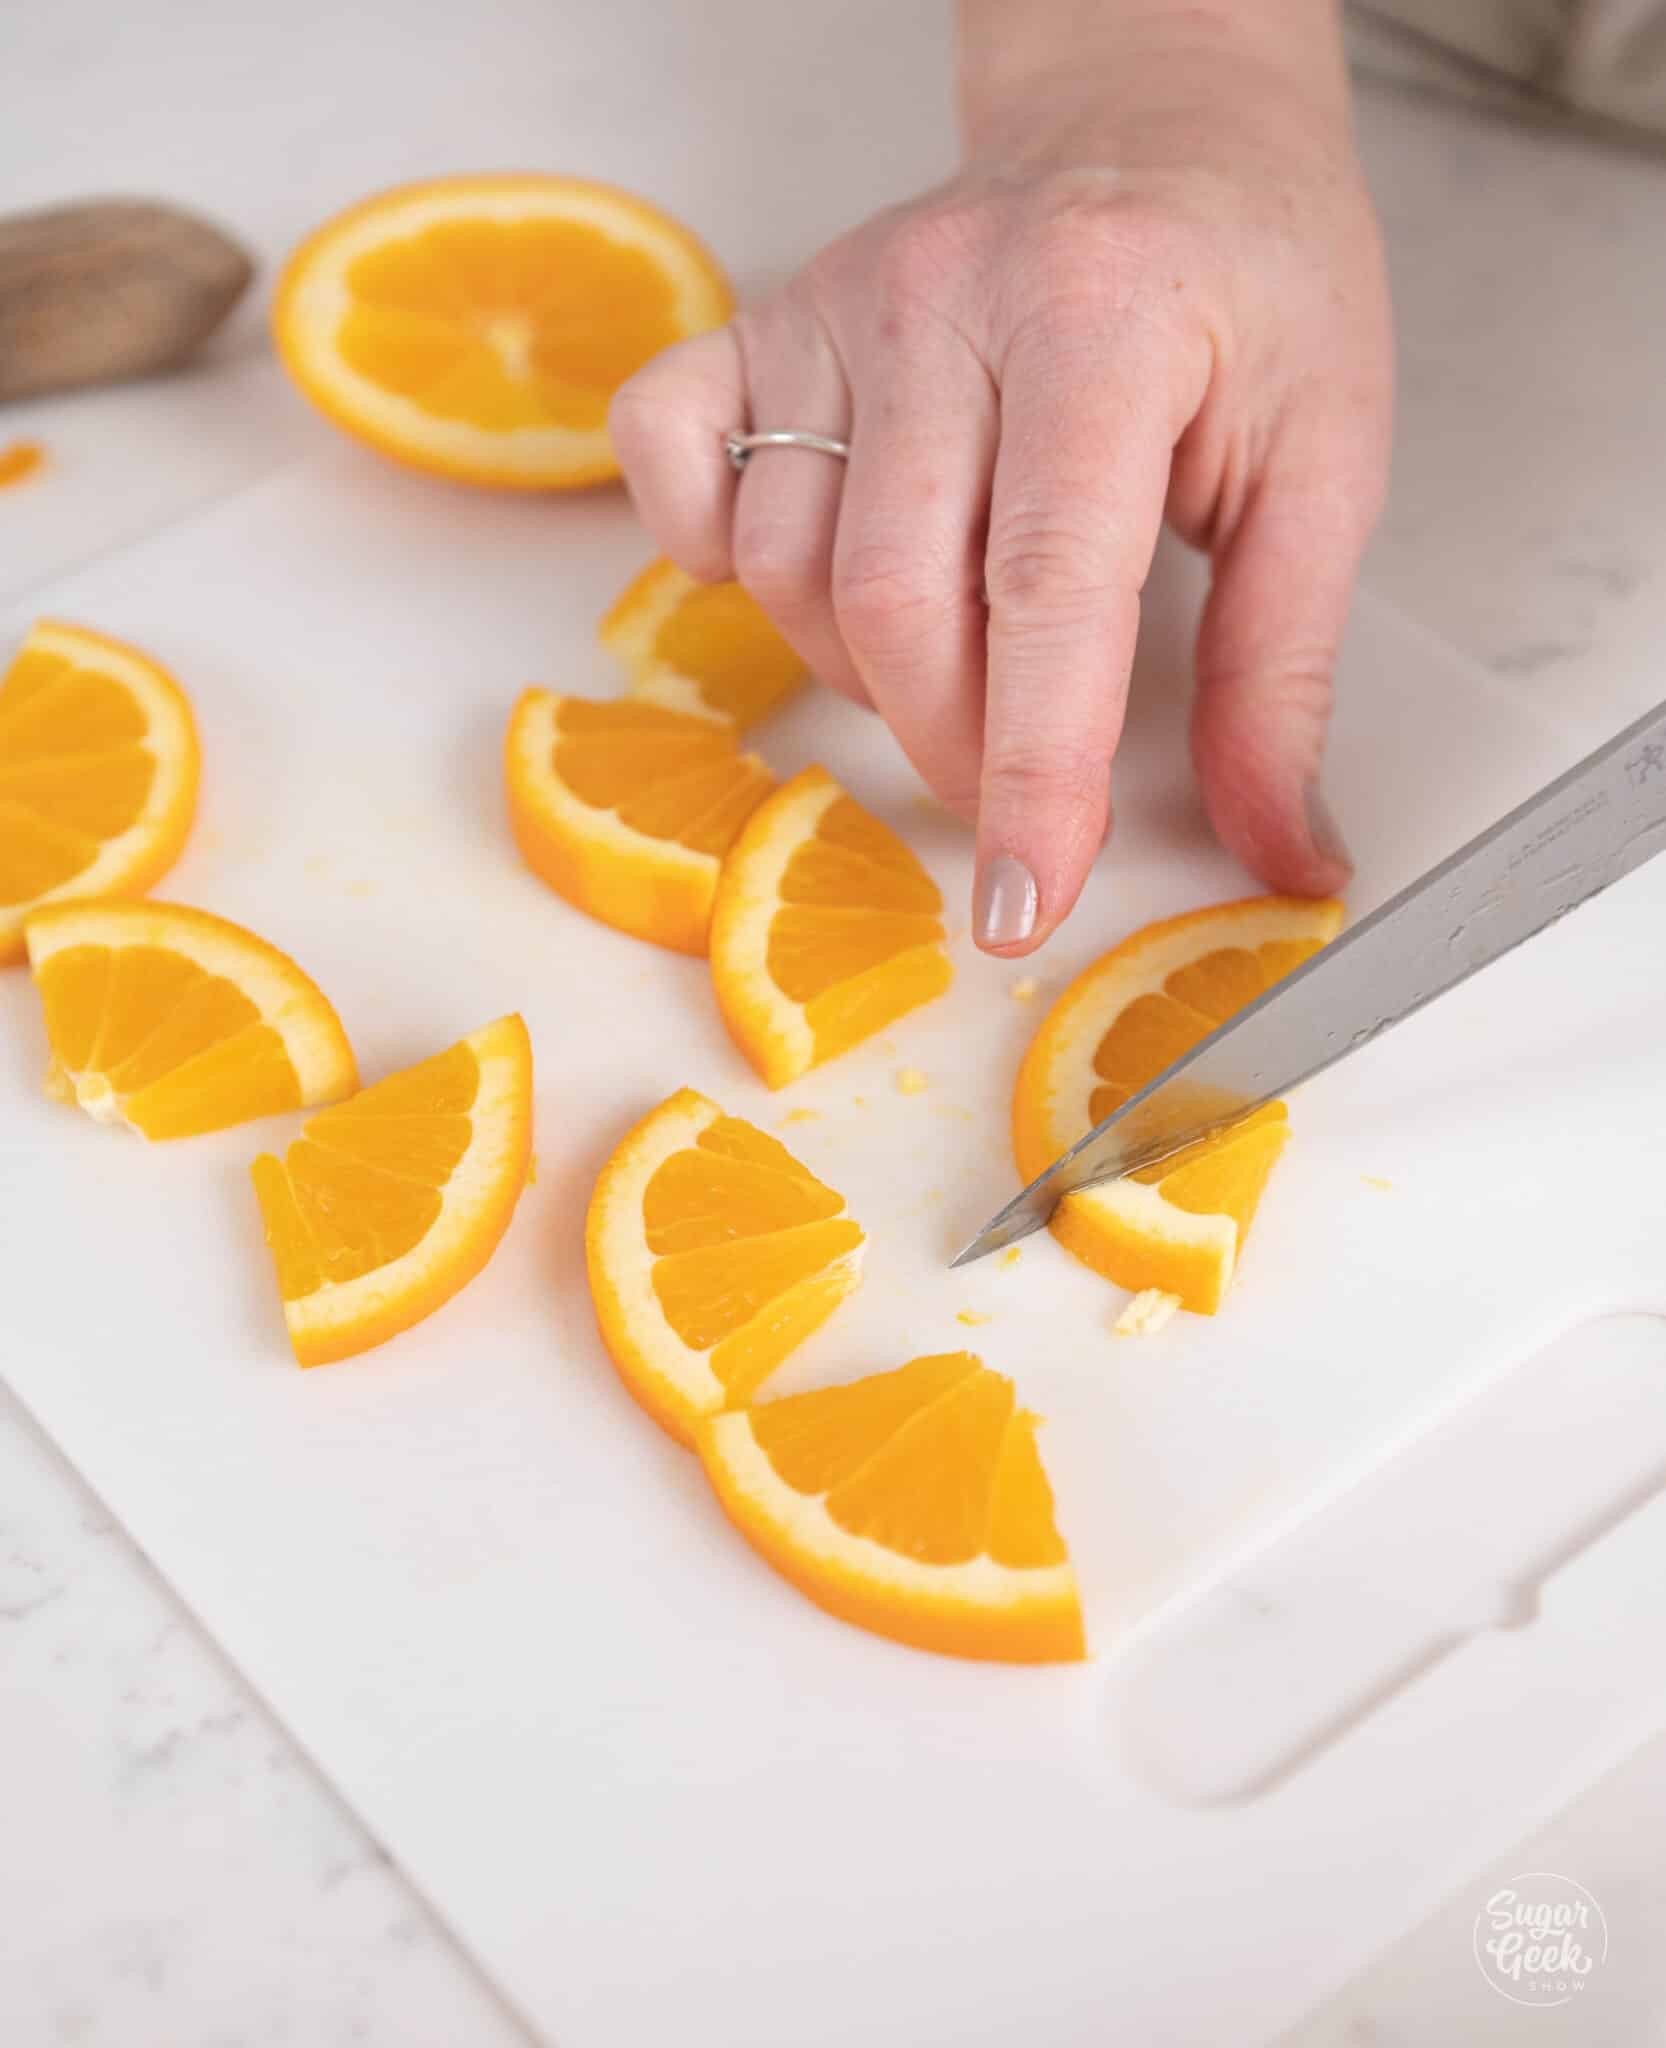 slicing oranges with a knife